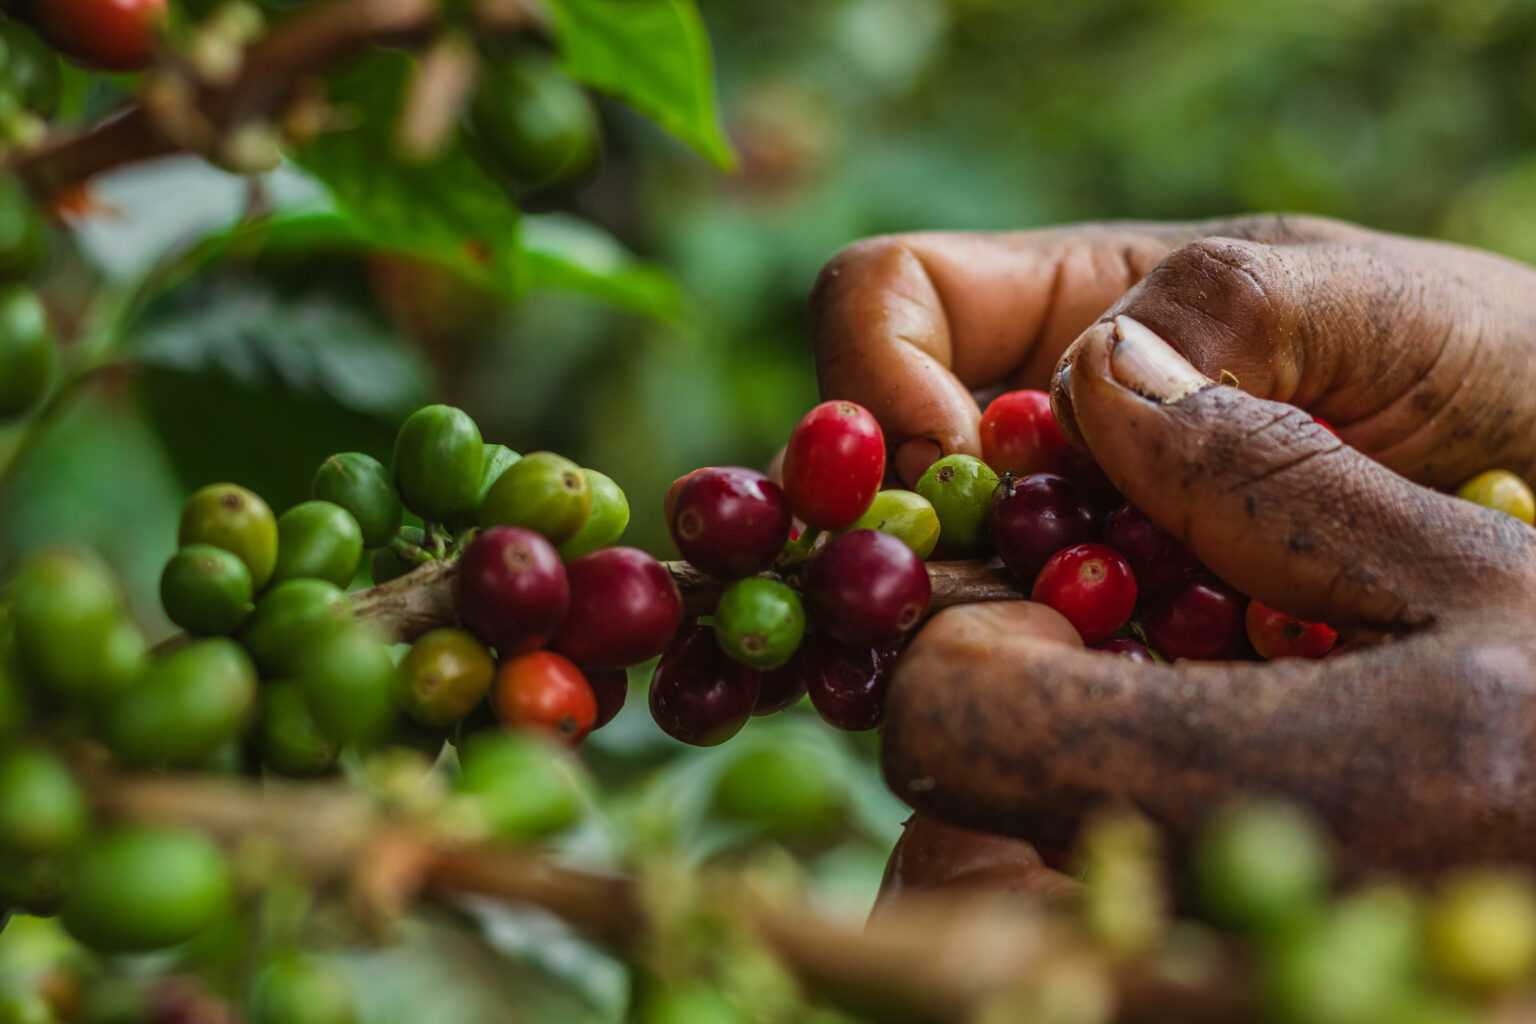 Producer hand picking ripe arabica coffee cherries from tree